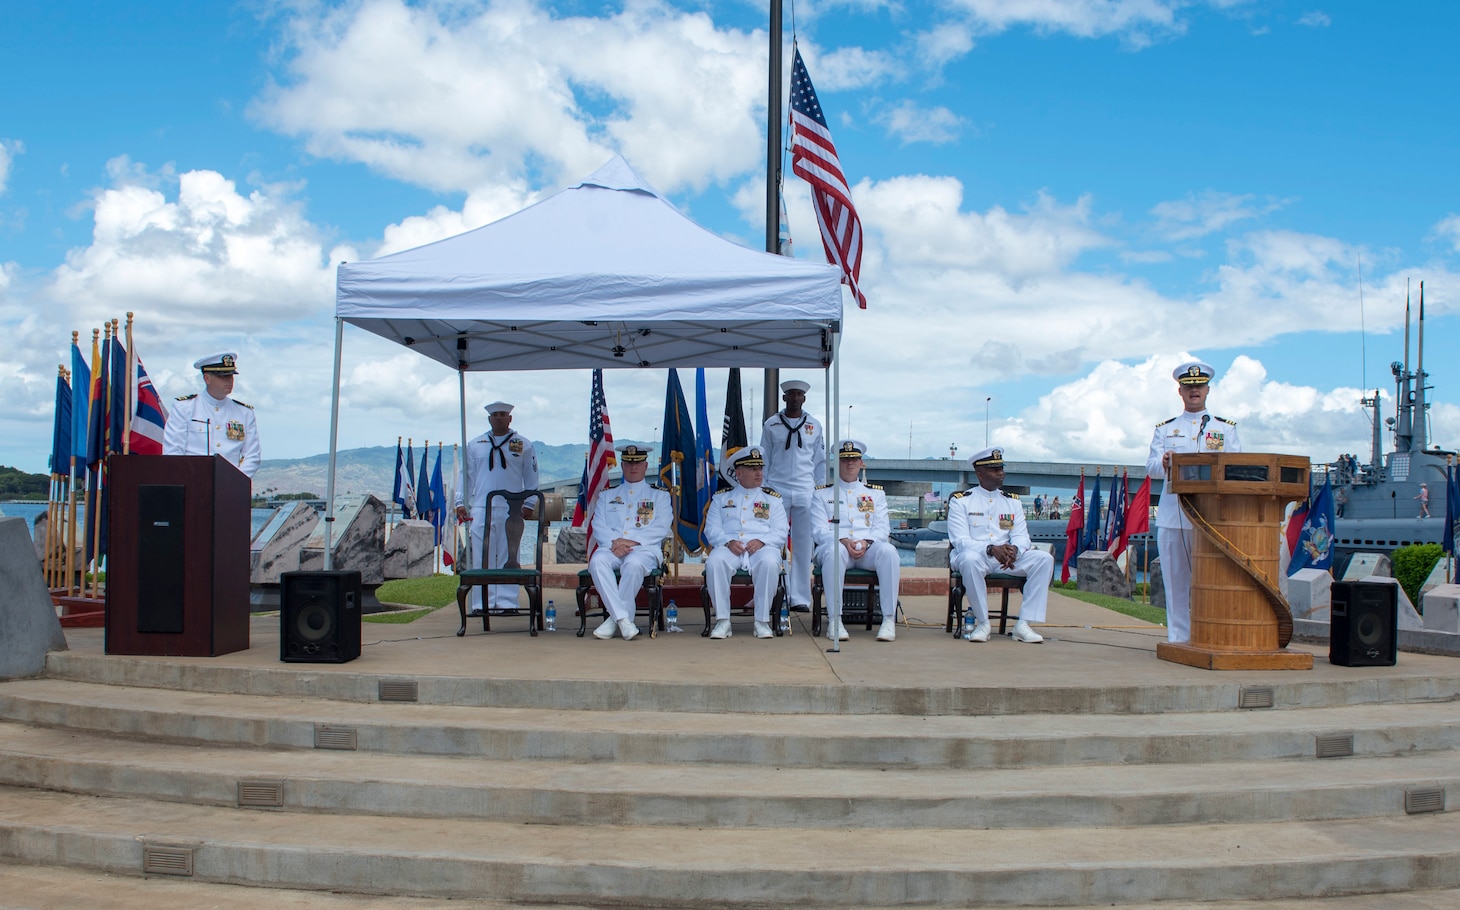 PEARL HARBOR (Aug. 31, 2018) - Cmdr. Chance Litton addresses guests after assuming command of the Los Angeles-class fast-attack submarine USS Chicago (SSN 721) during Chicago’s change of command ceremony at the USS Bowfin Submarine Museum and Park in Pearl Harbor, Hawaii, Aug. 31. (U.S. Navy photo by Mass Communication Specialist 2nd Class Shaun Griffin/Released)